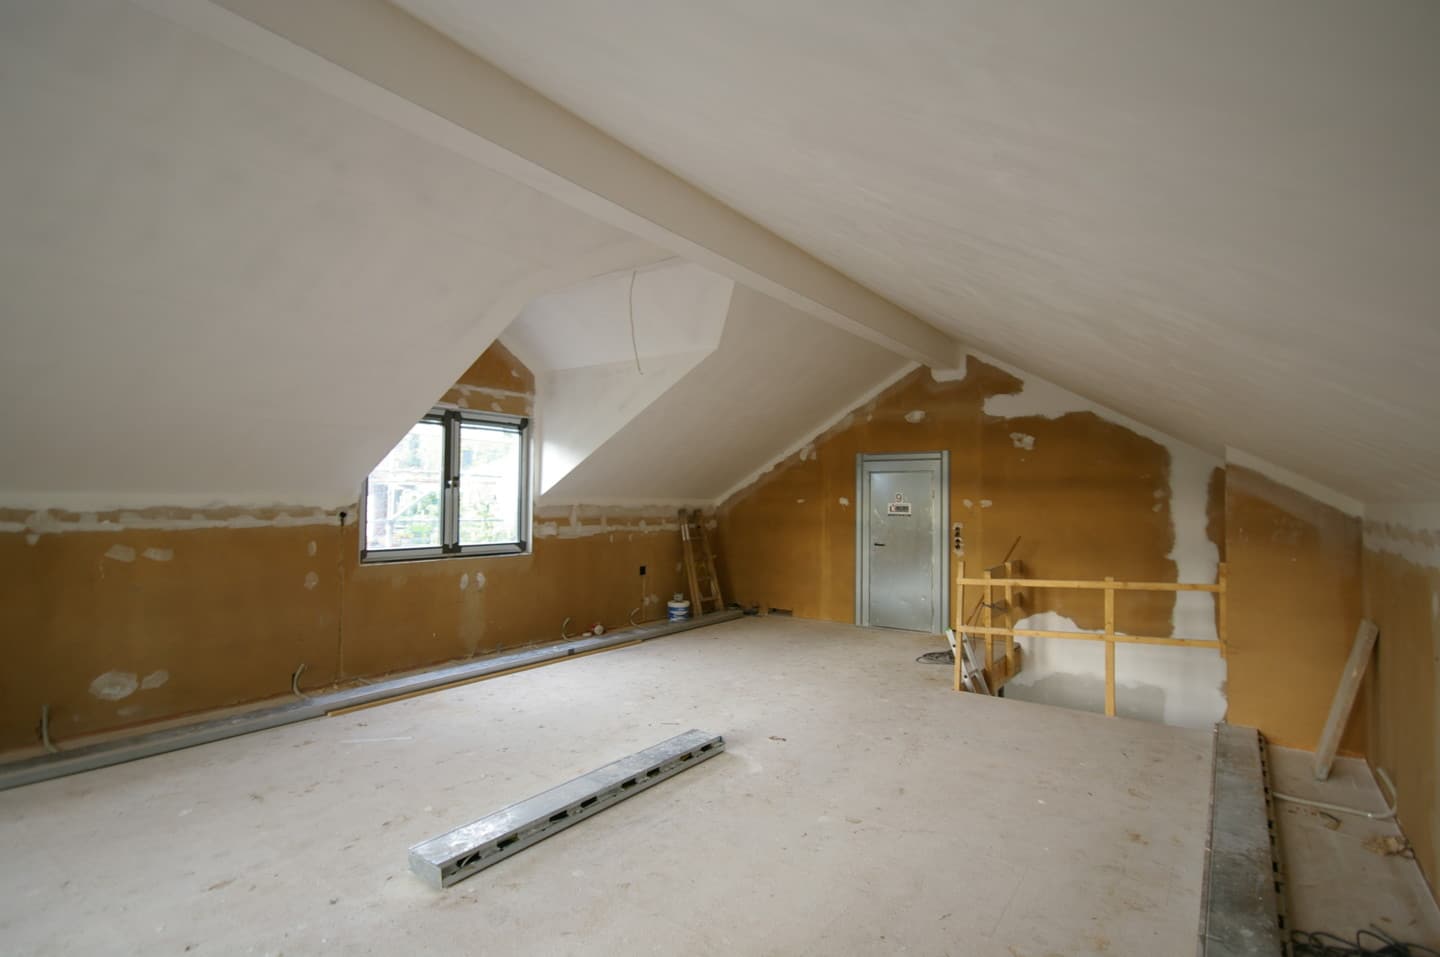 Here you can see an attic space which is having the UdiSTEP boards placed over the ply flooring (you might need to look closely to see it!). This is exactly where to use this type of product as it absorbs impact noise from walking on hard floors so well. 